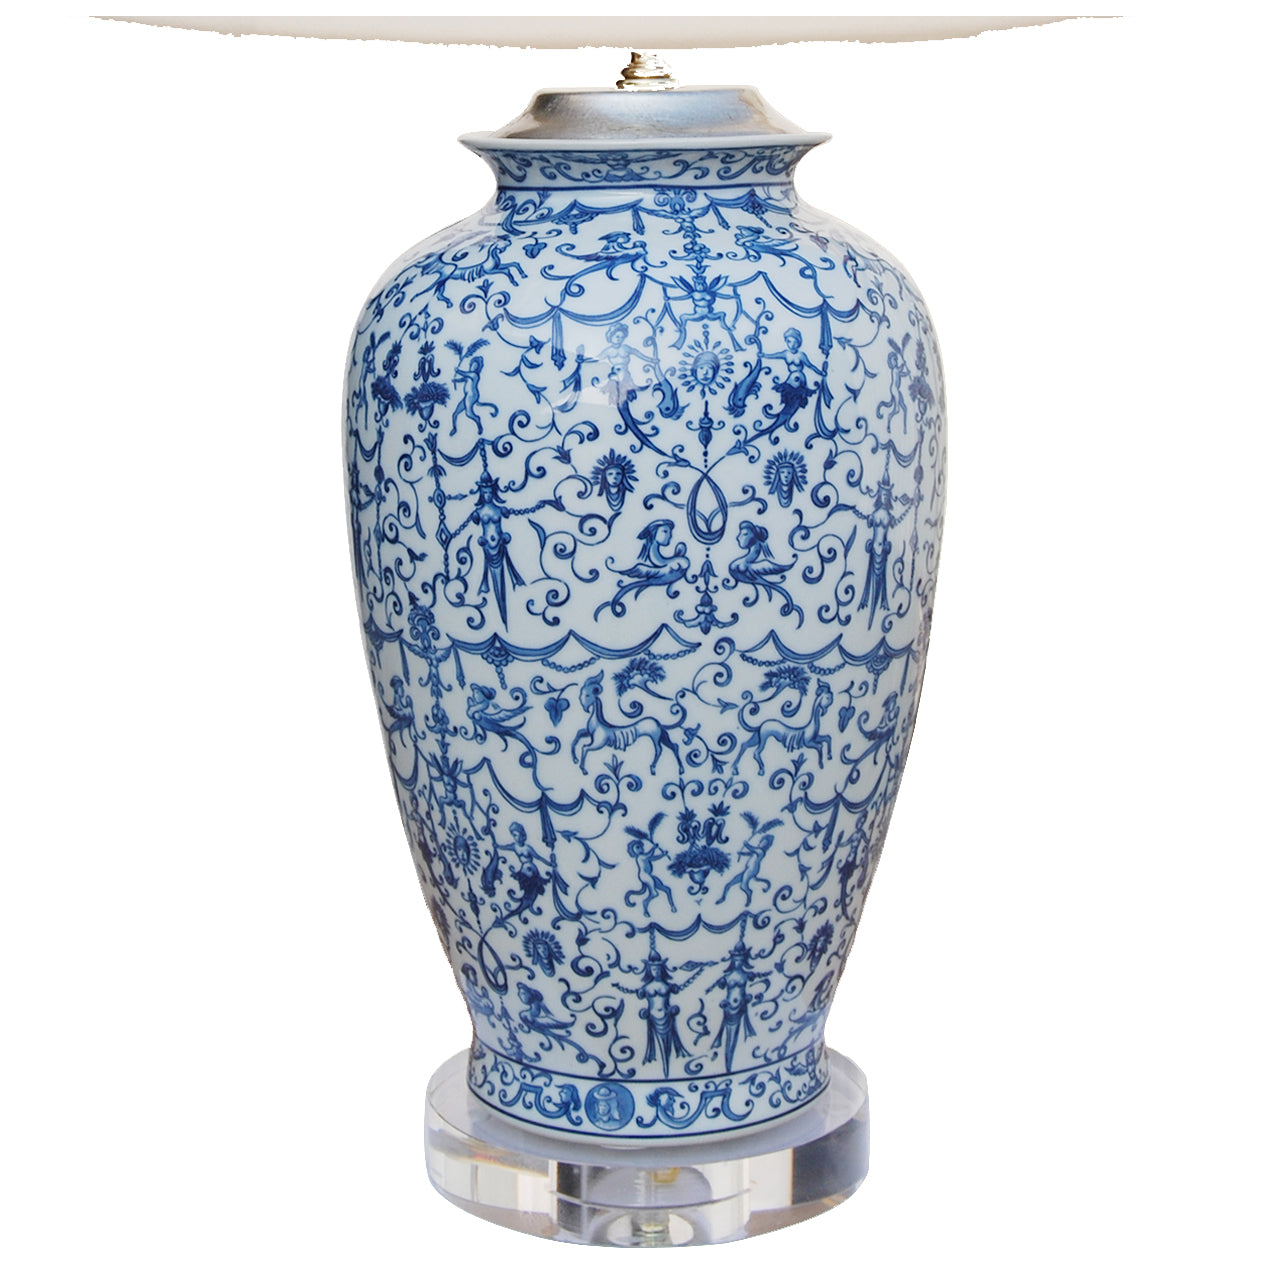 Oriental Blue & White Table Lamp with Crystal Base